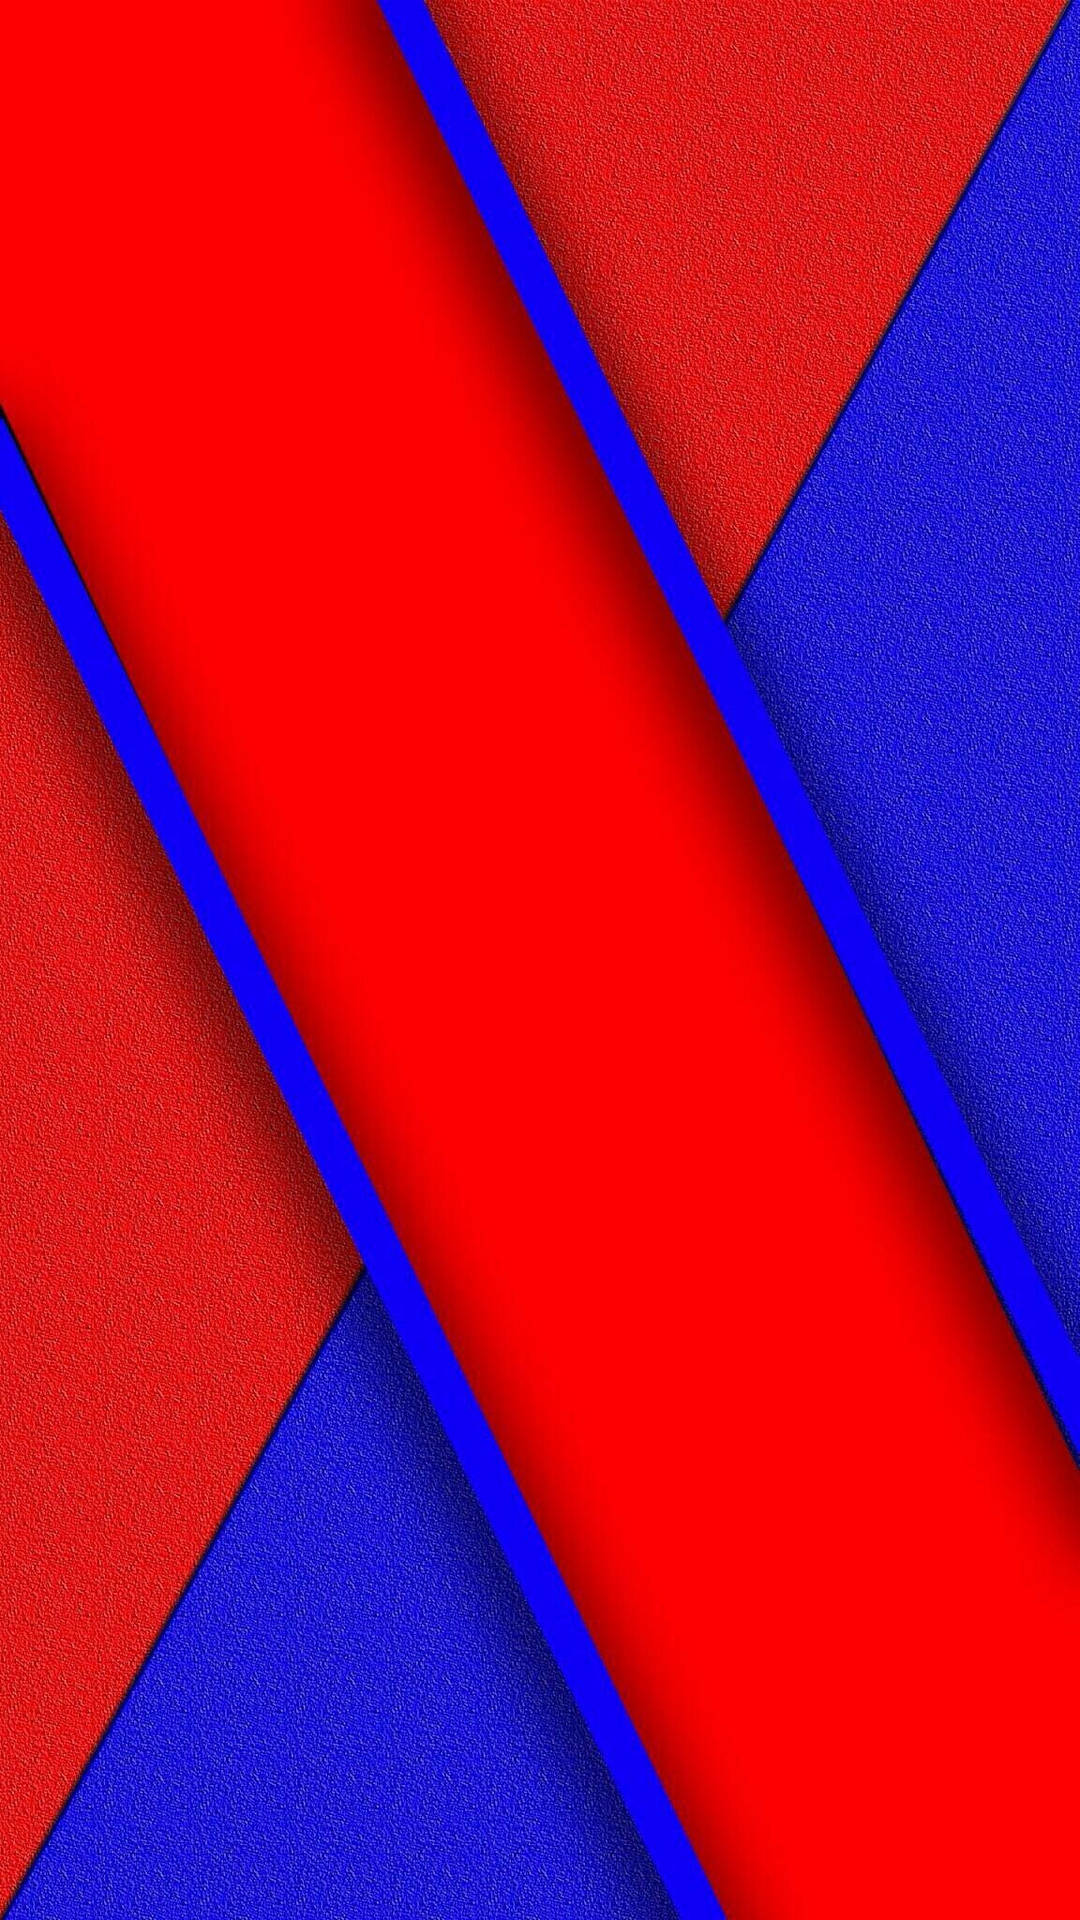 Vibrant Red And Blue Art Wallpaper